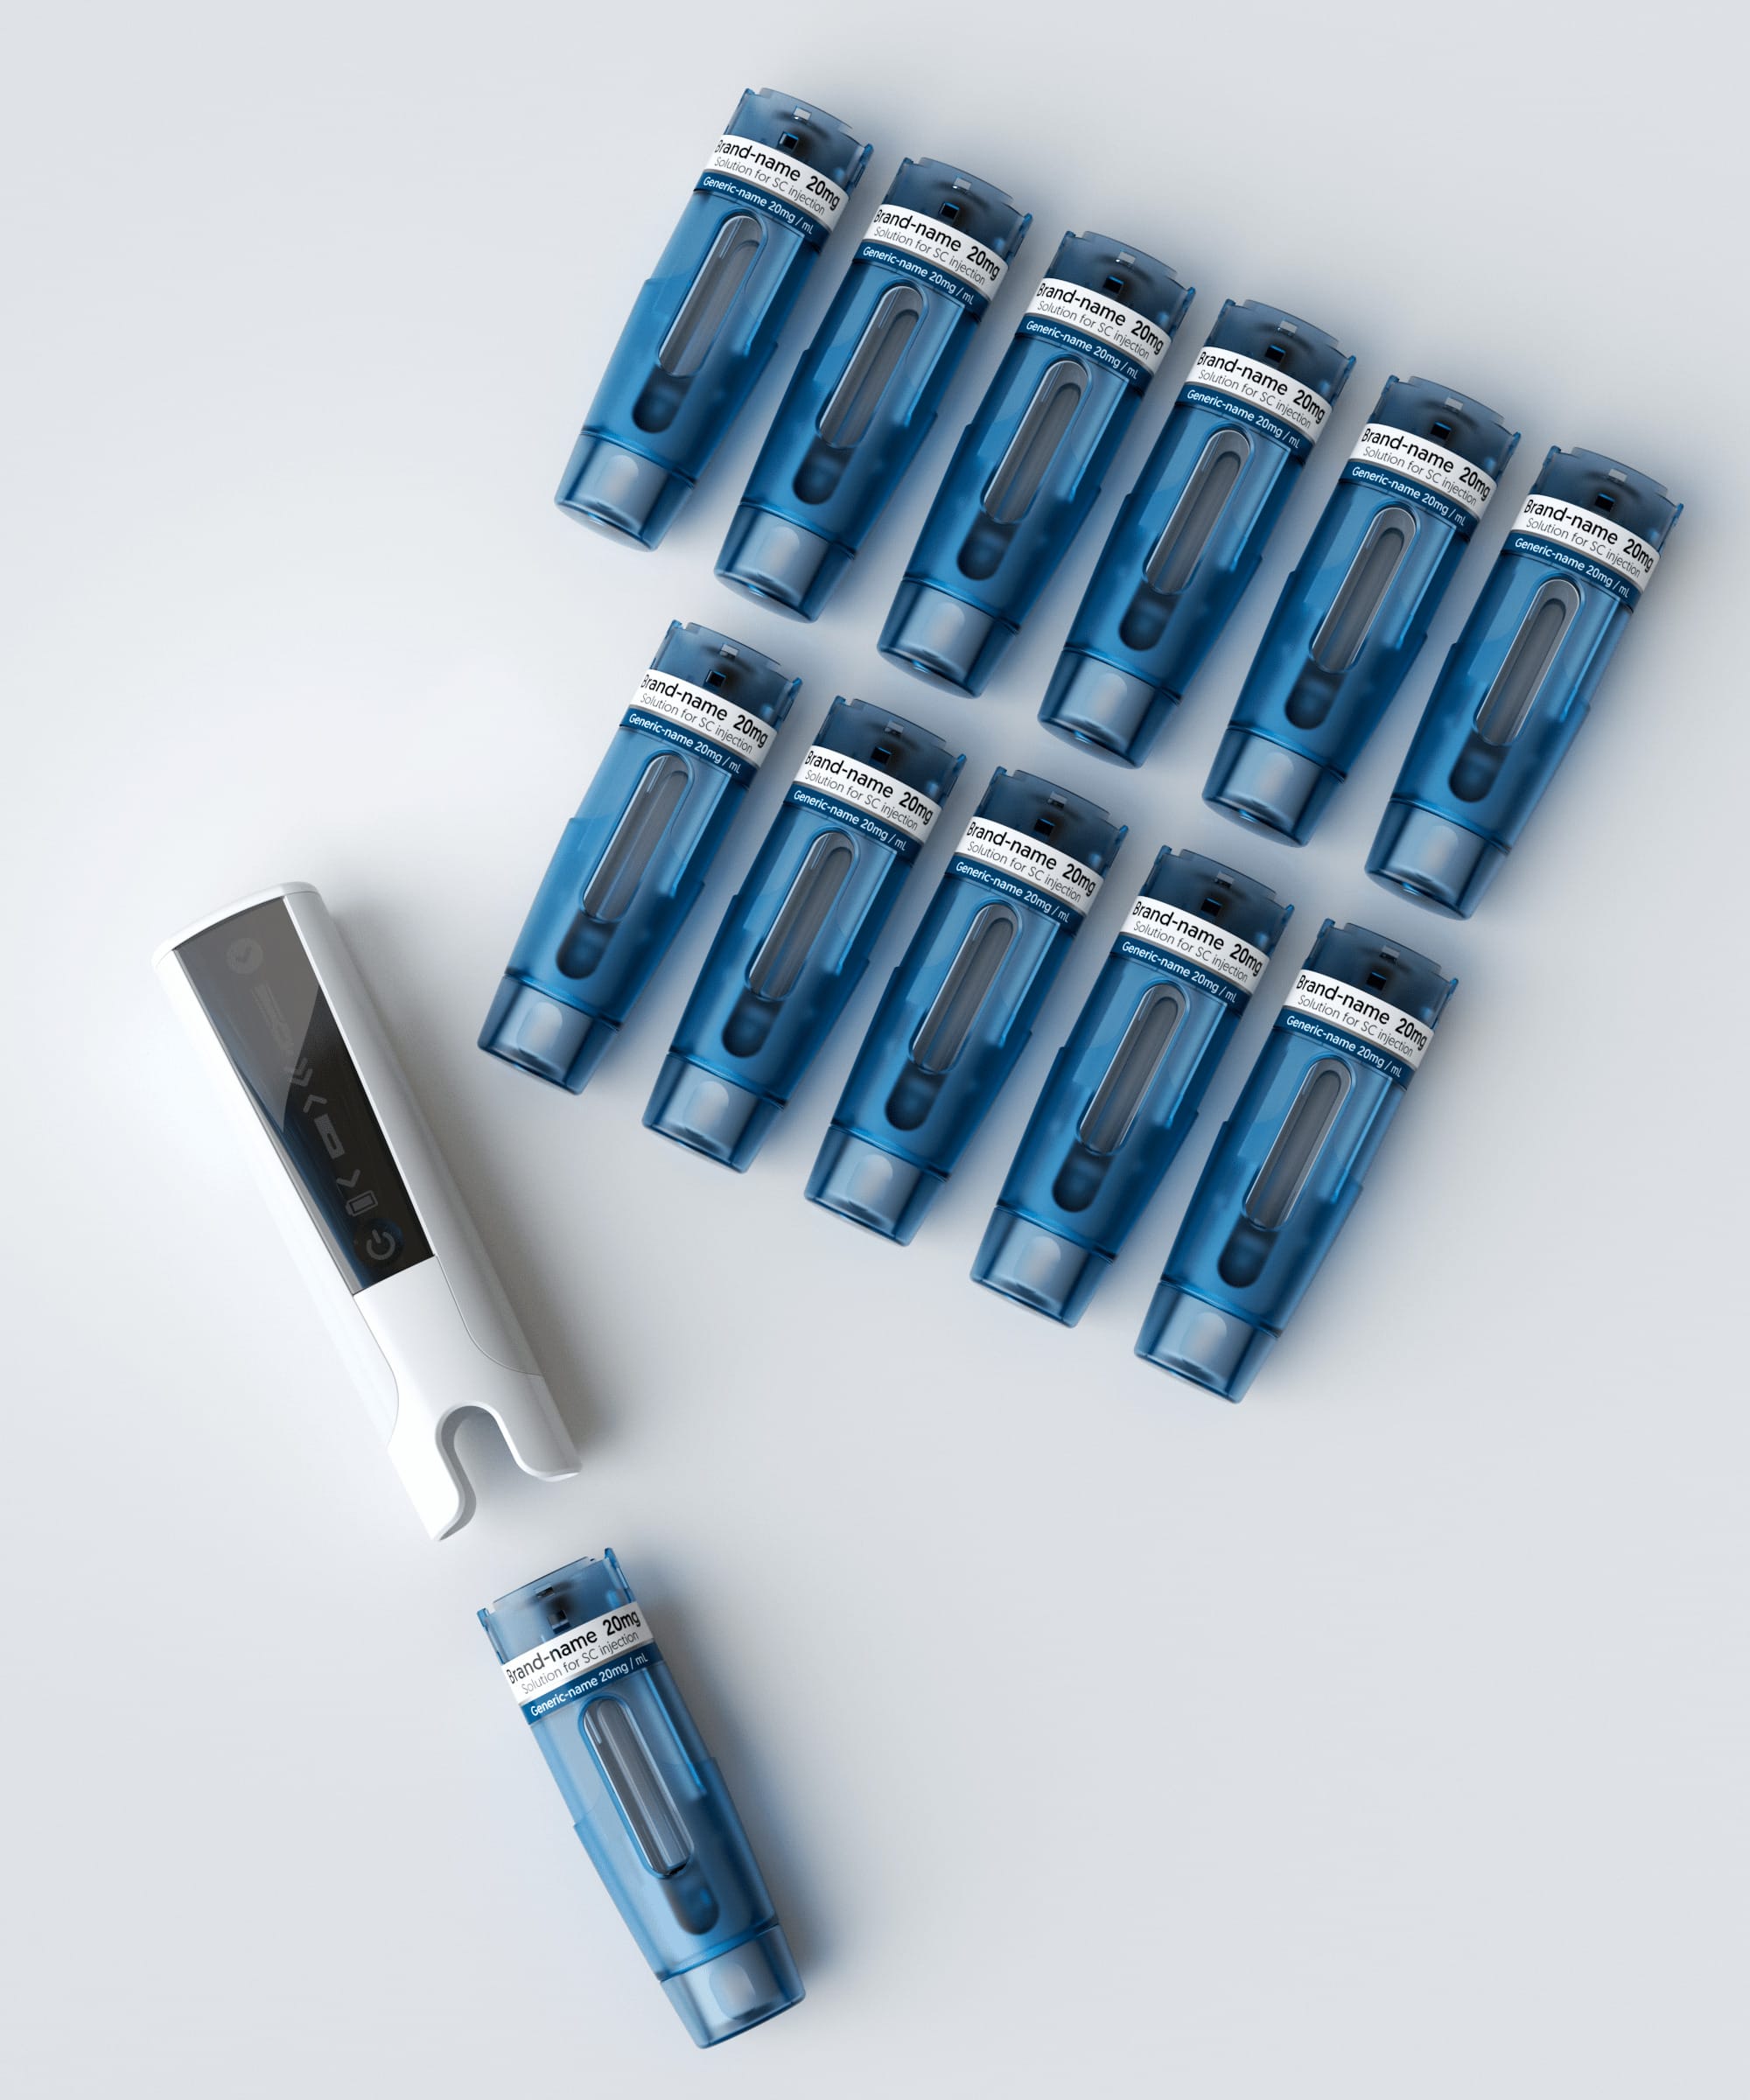 Phillips-Medisize Smart Autoinjector - Reducing Waste Product Shot